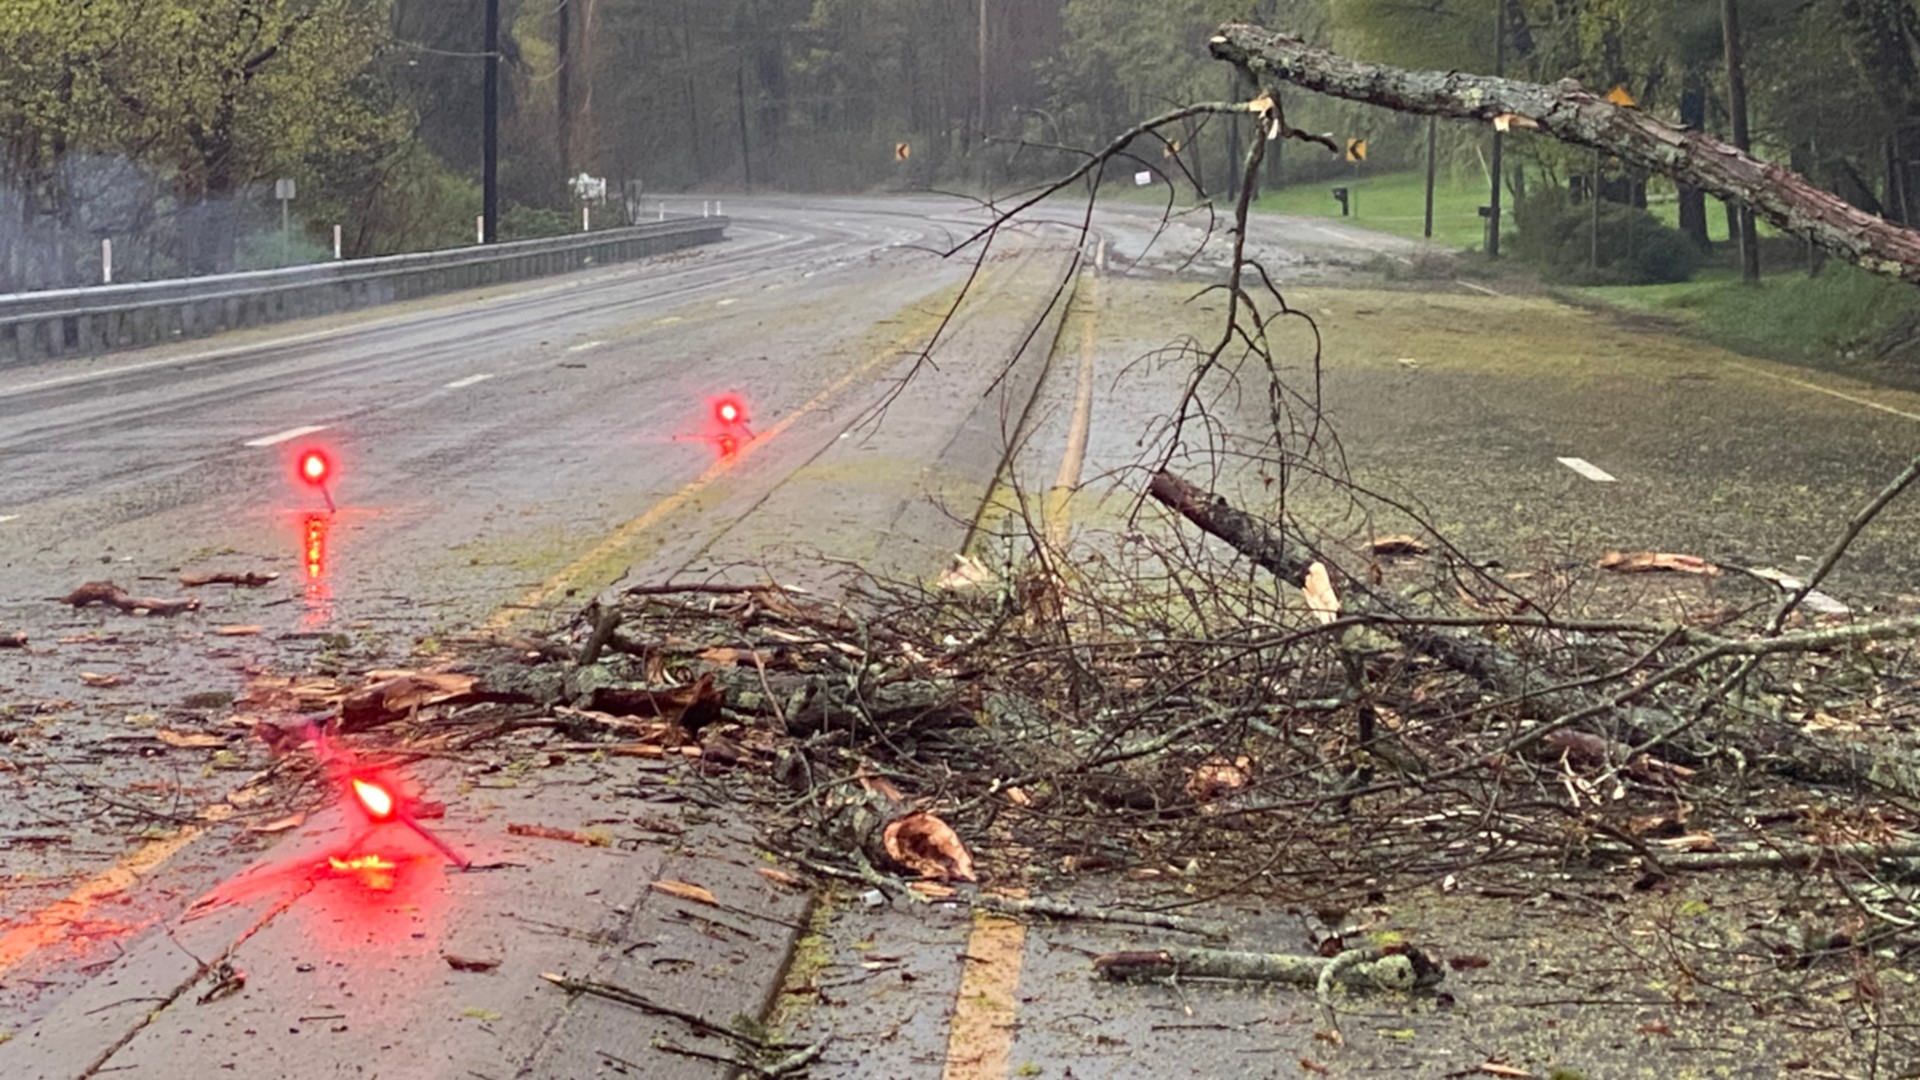 Routes 6 & 11 had lanes shut down and homes and businesses do not have power in the area.